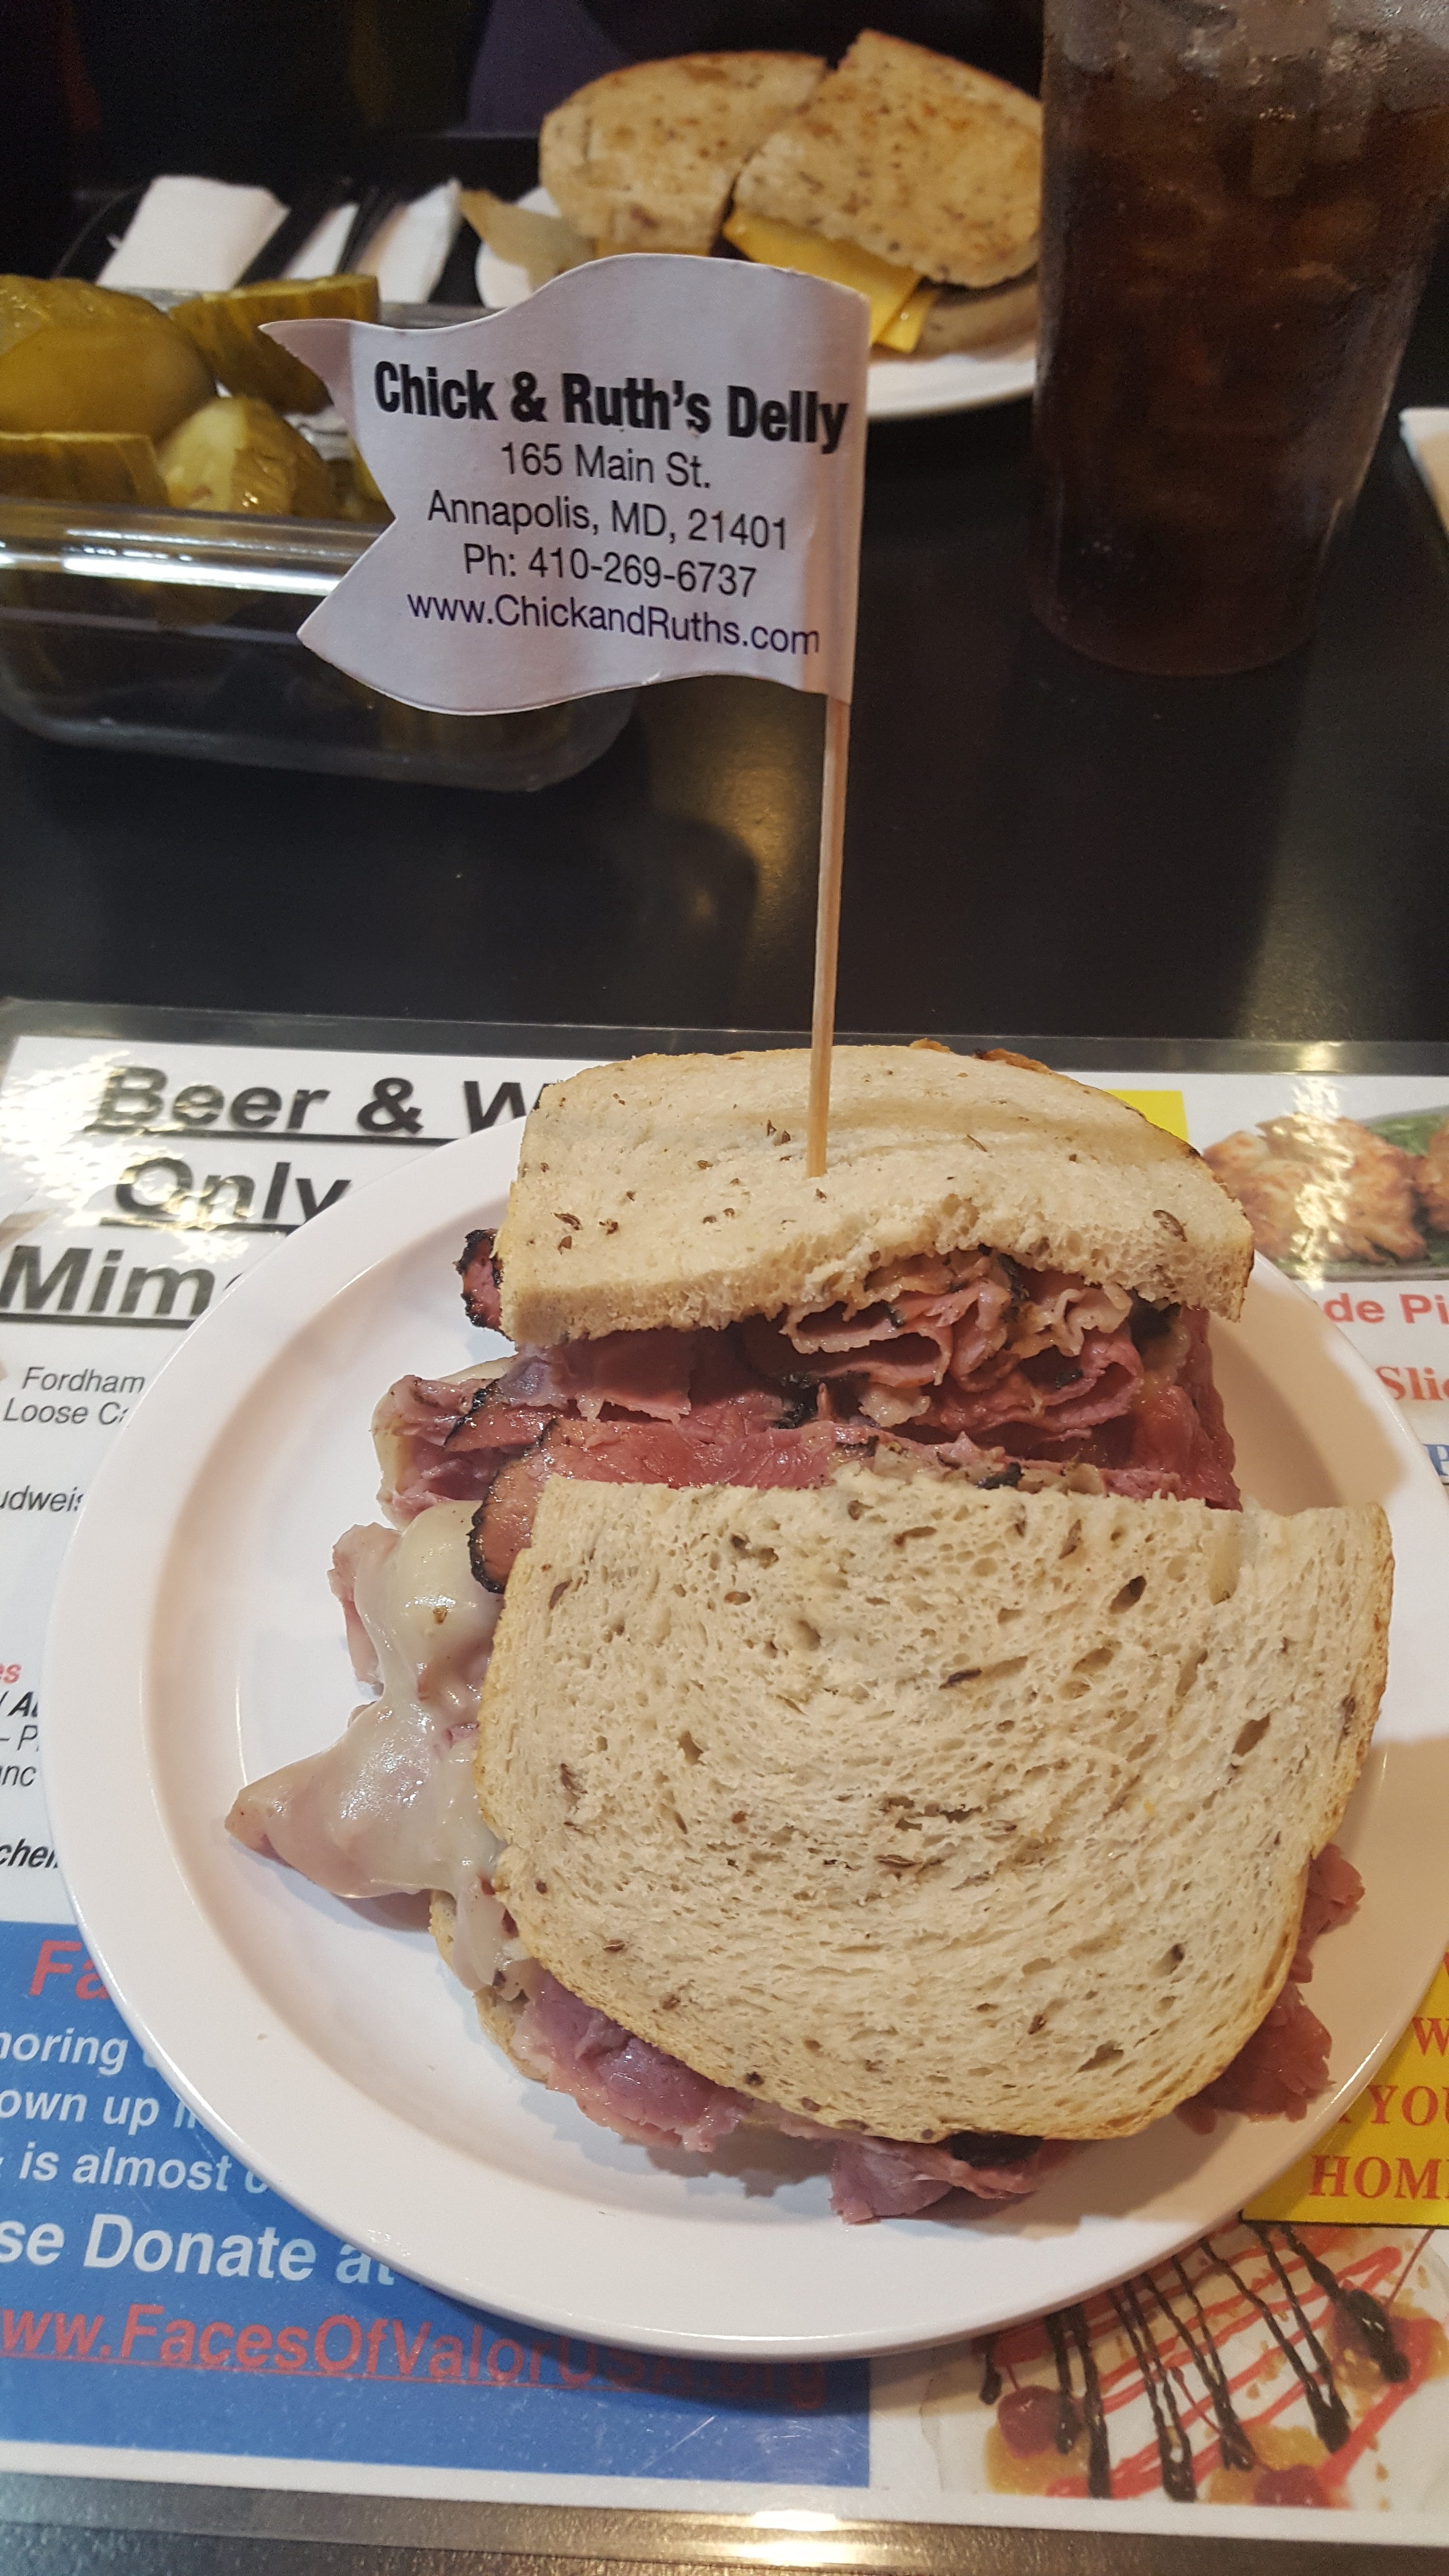 My Pastrami Sandwich at Chick & Ruth's Delly, Annapolis, MD